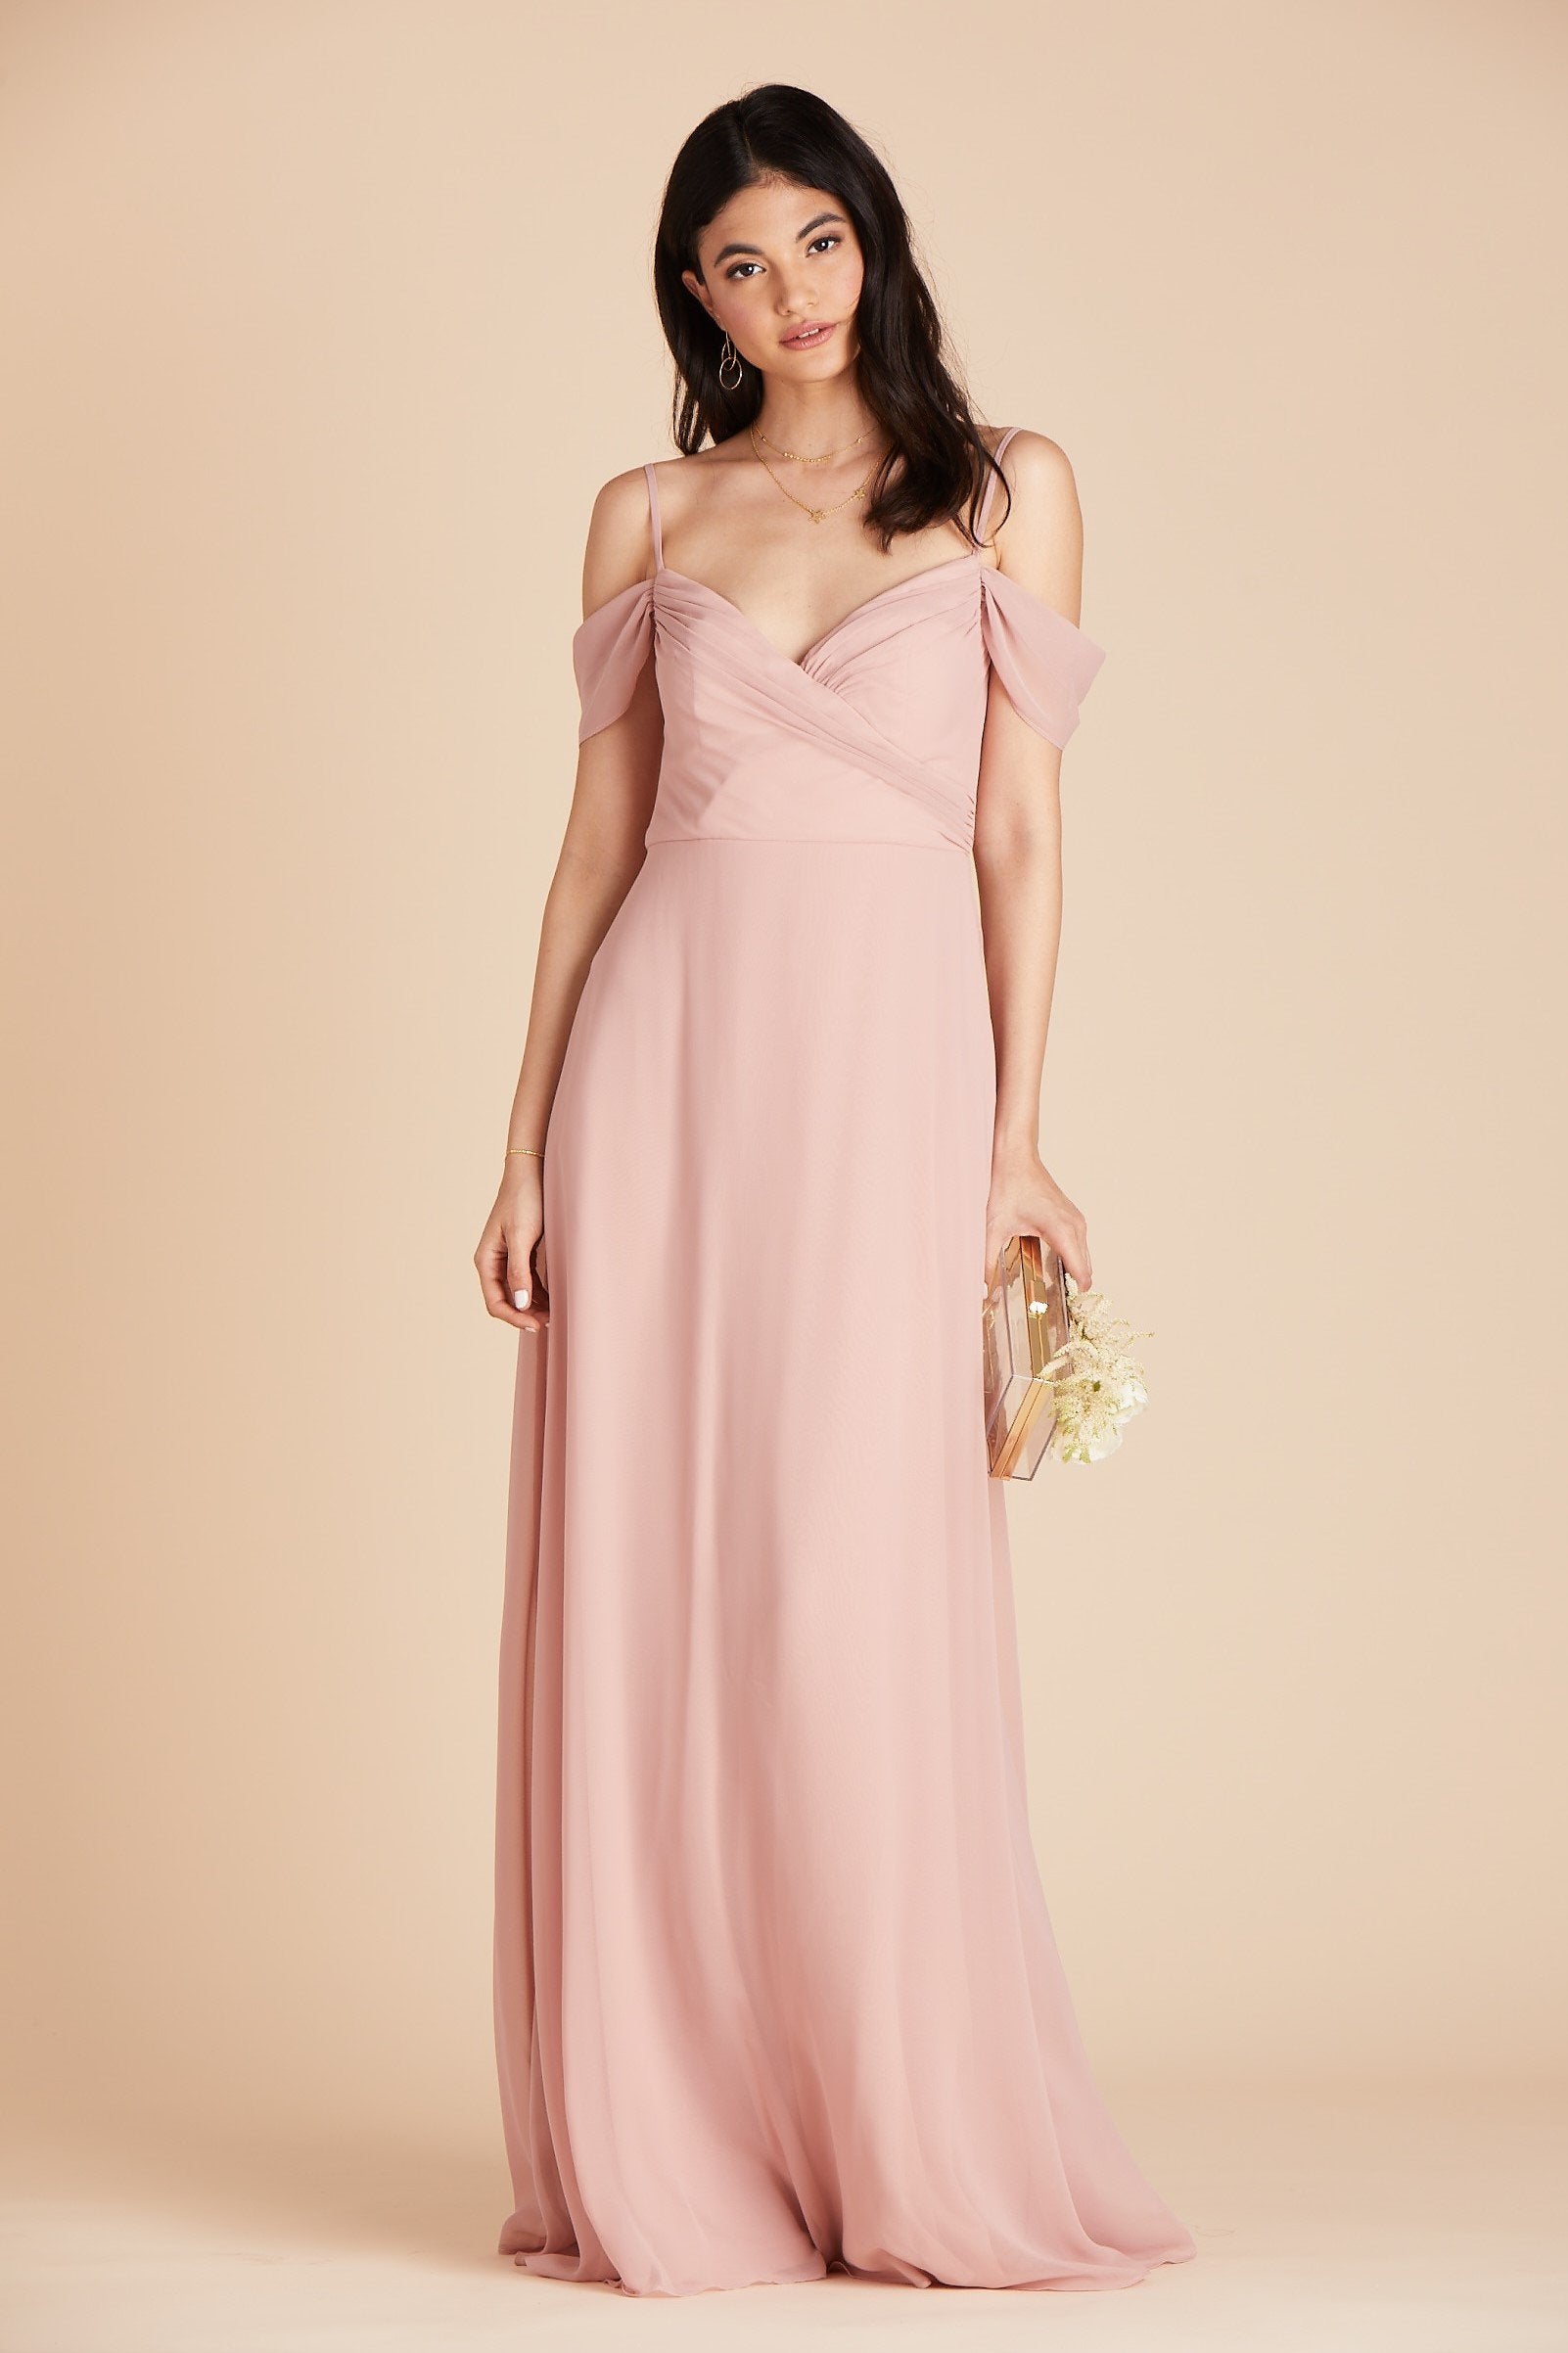 Front view of the Spence Convertible Dress in dusty rose chiffon worn by a slender model with a light skin tone. 